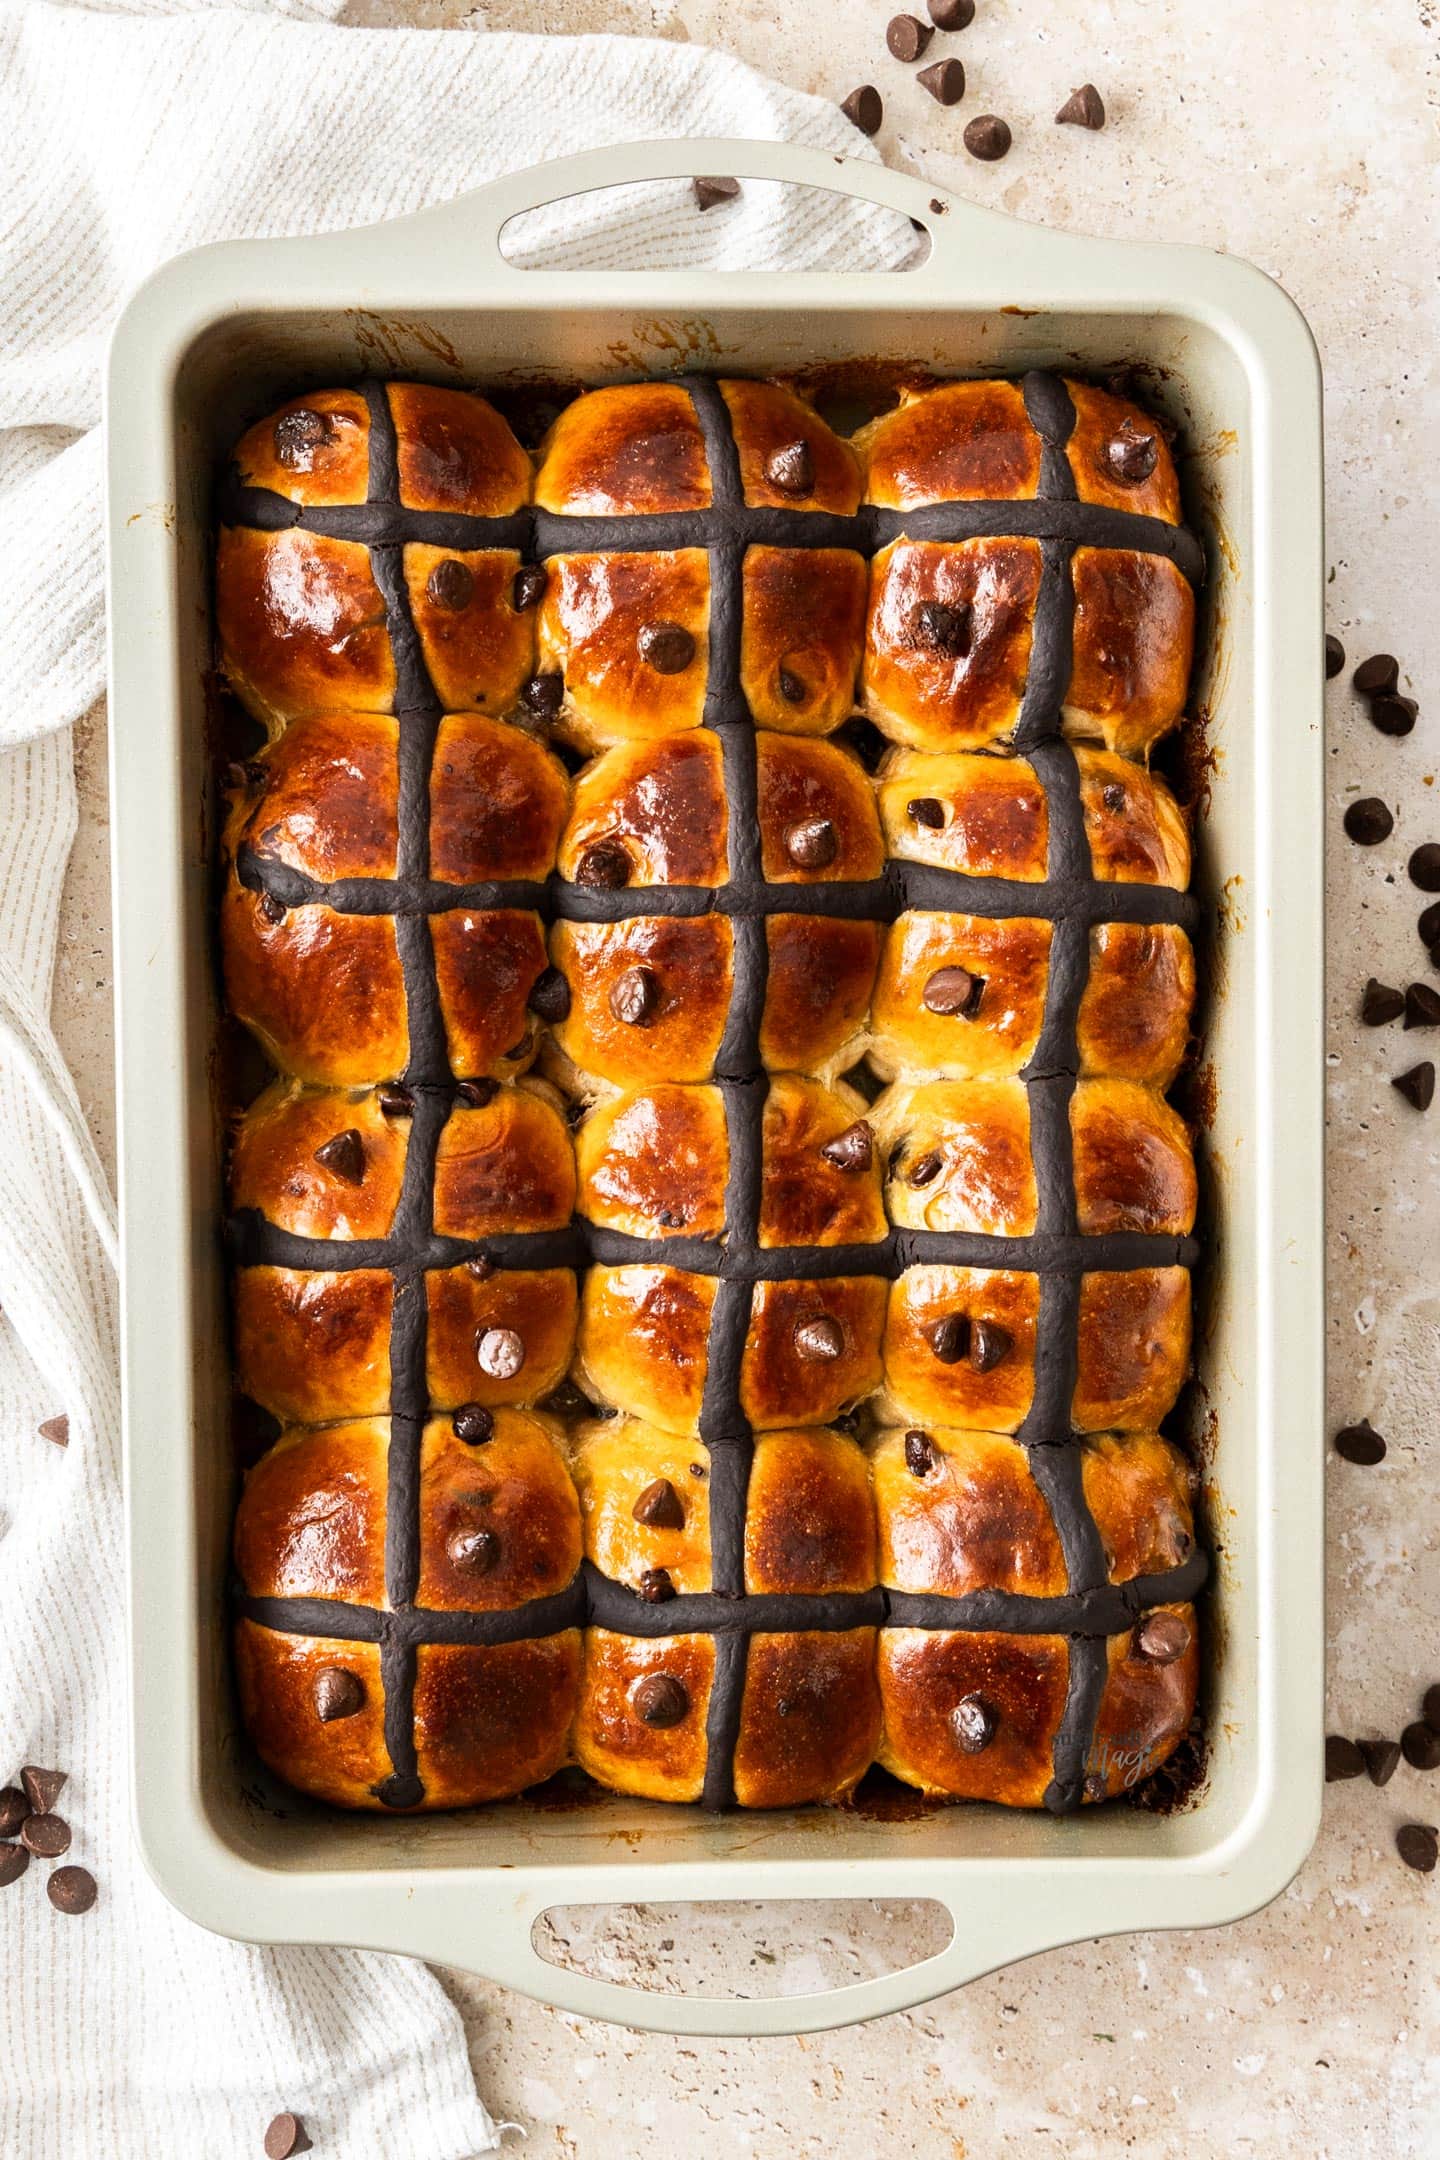 Top down view of 12 hot cross buns in a pan.